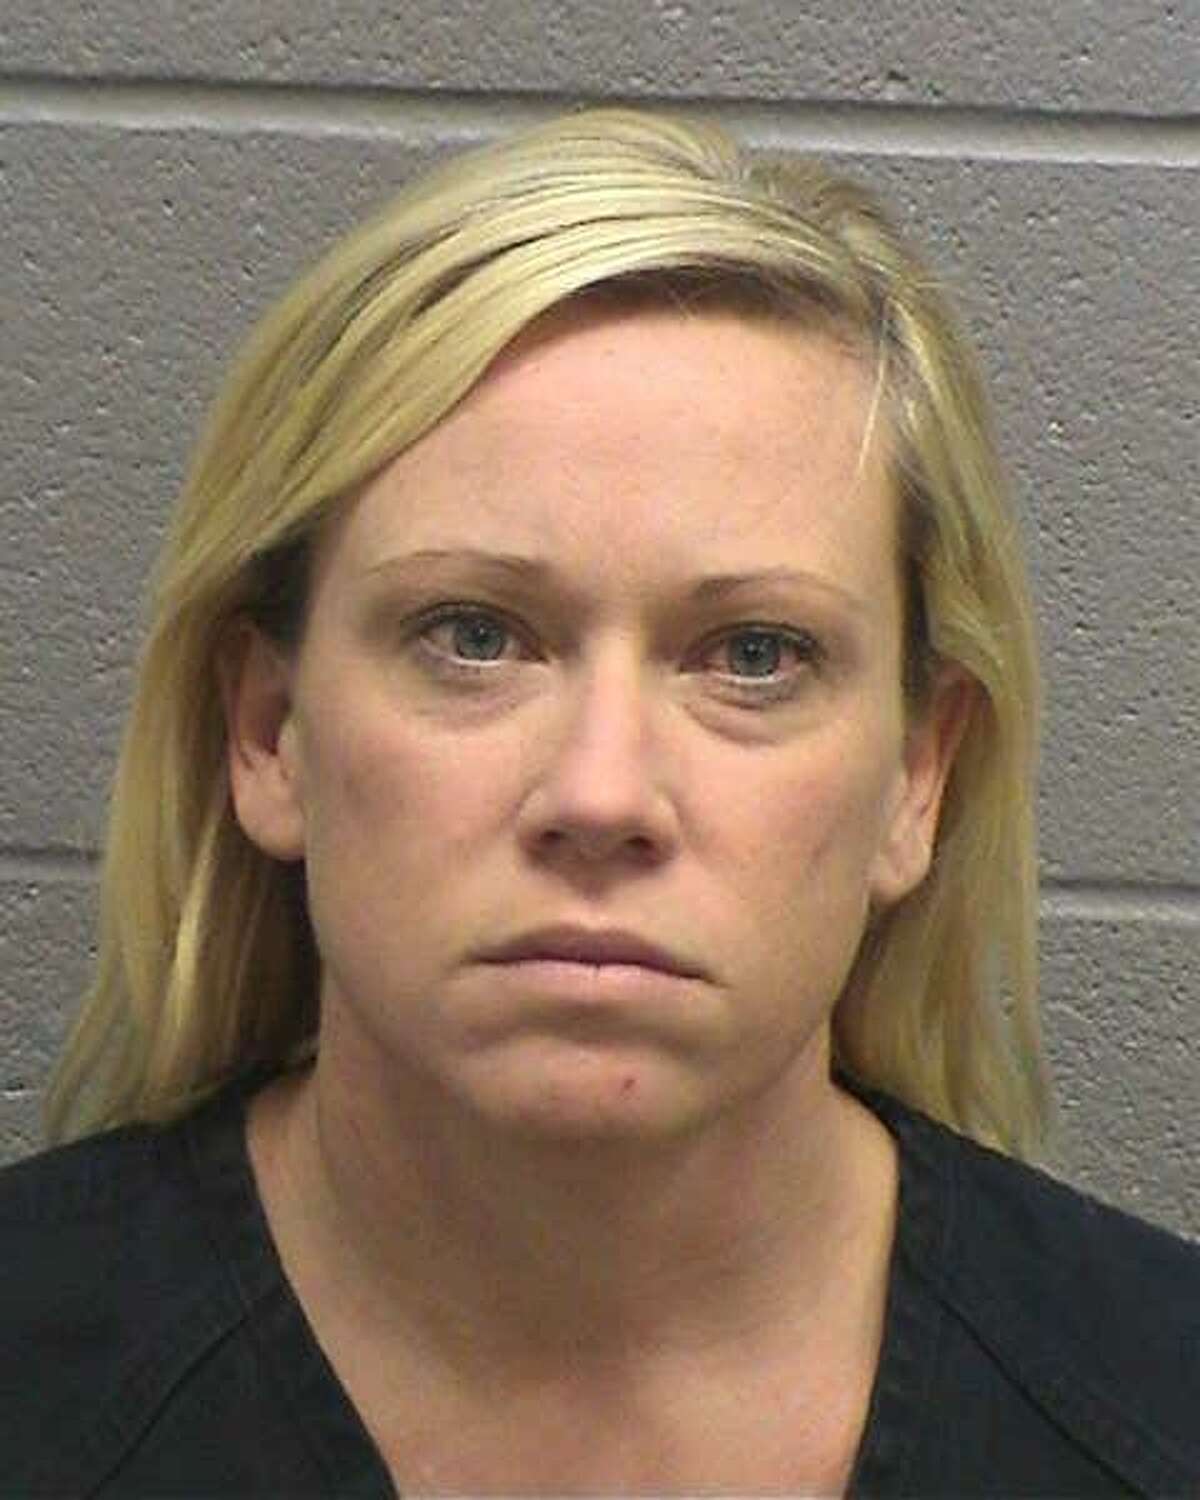 Jury acquits former teacher of indecency and improper relationship charges pic